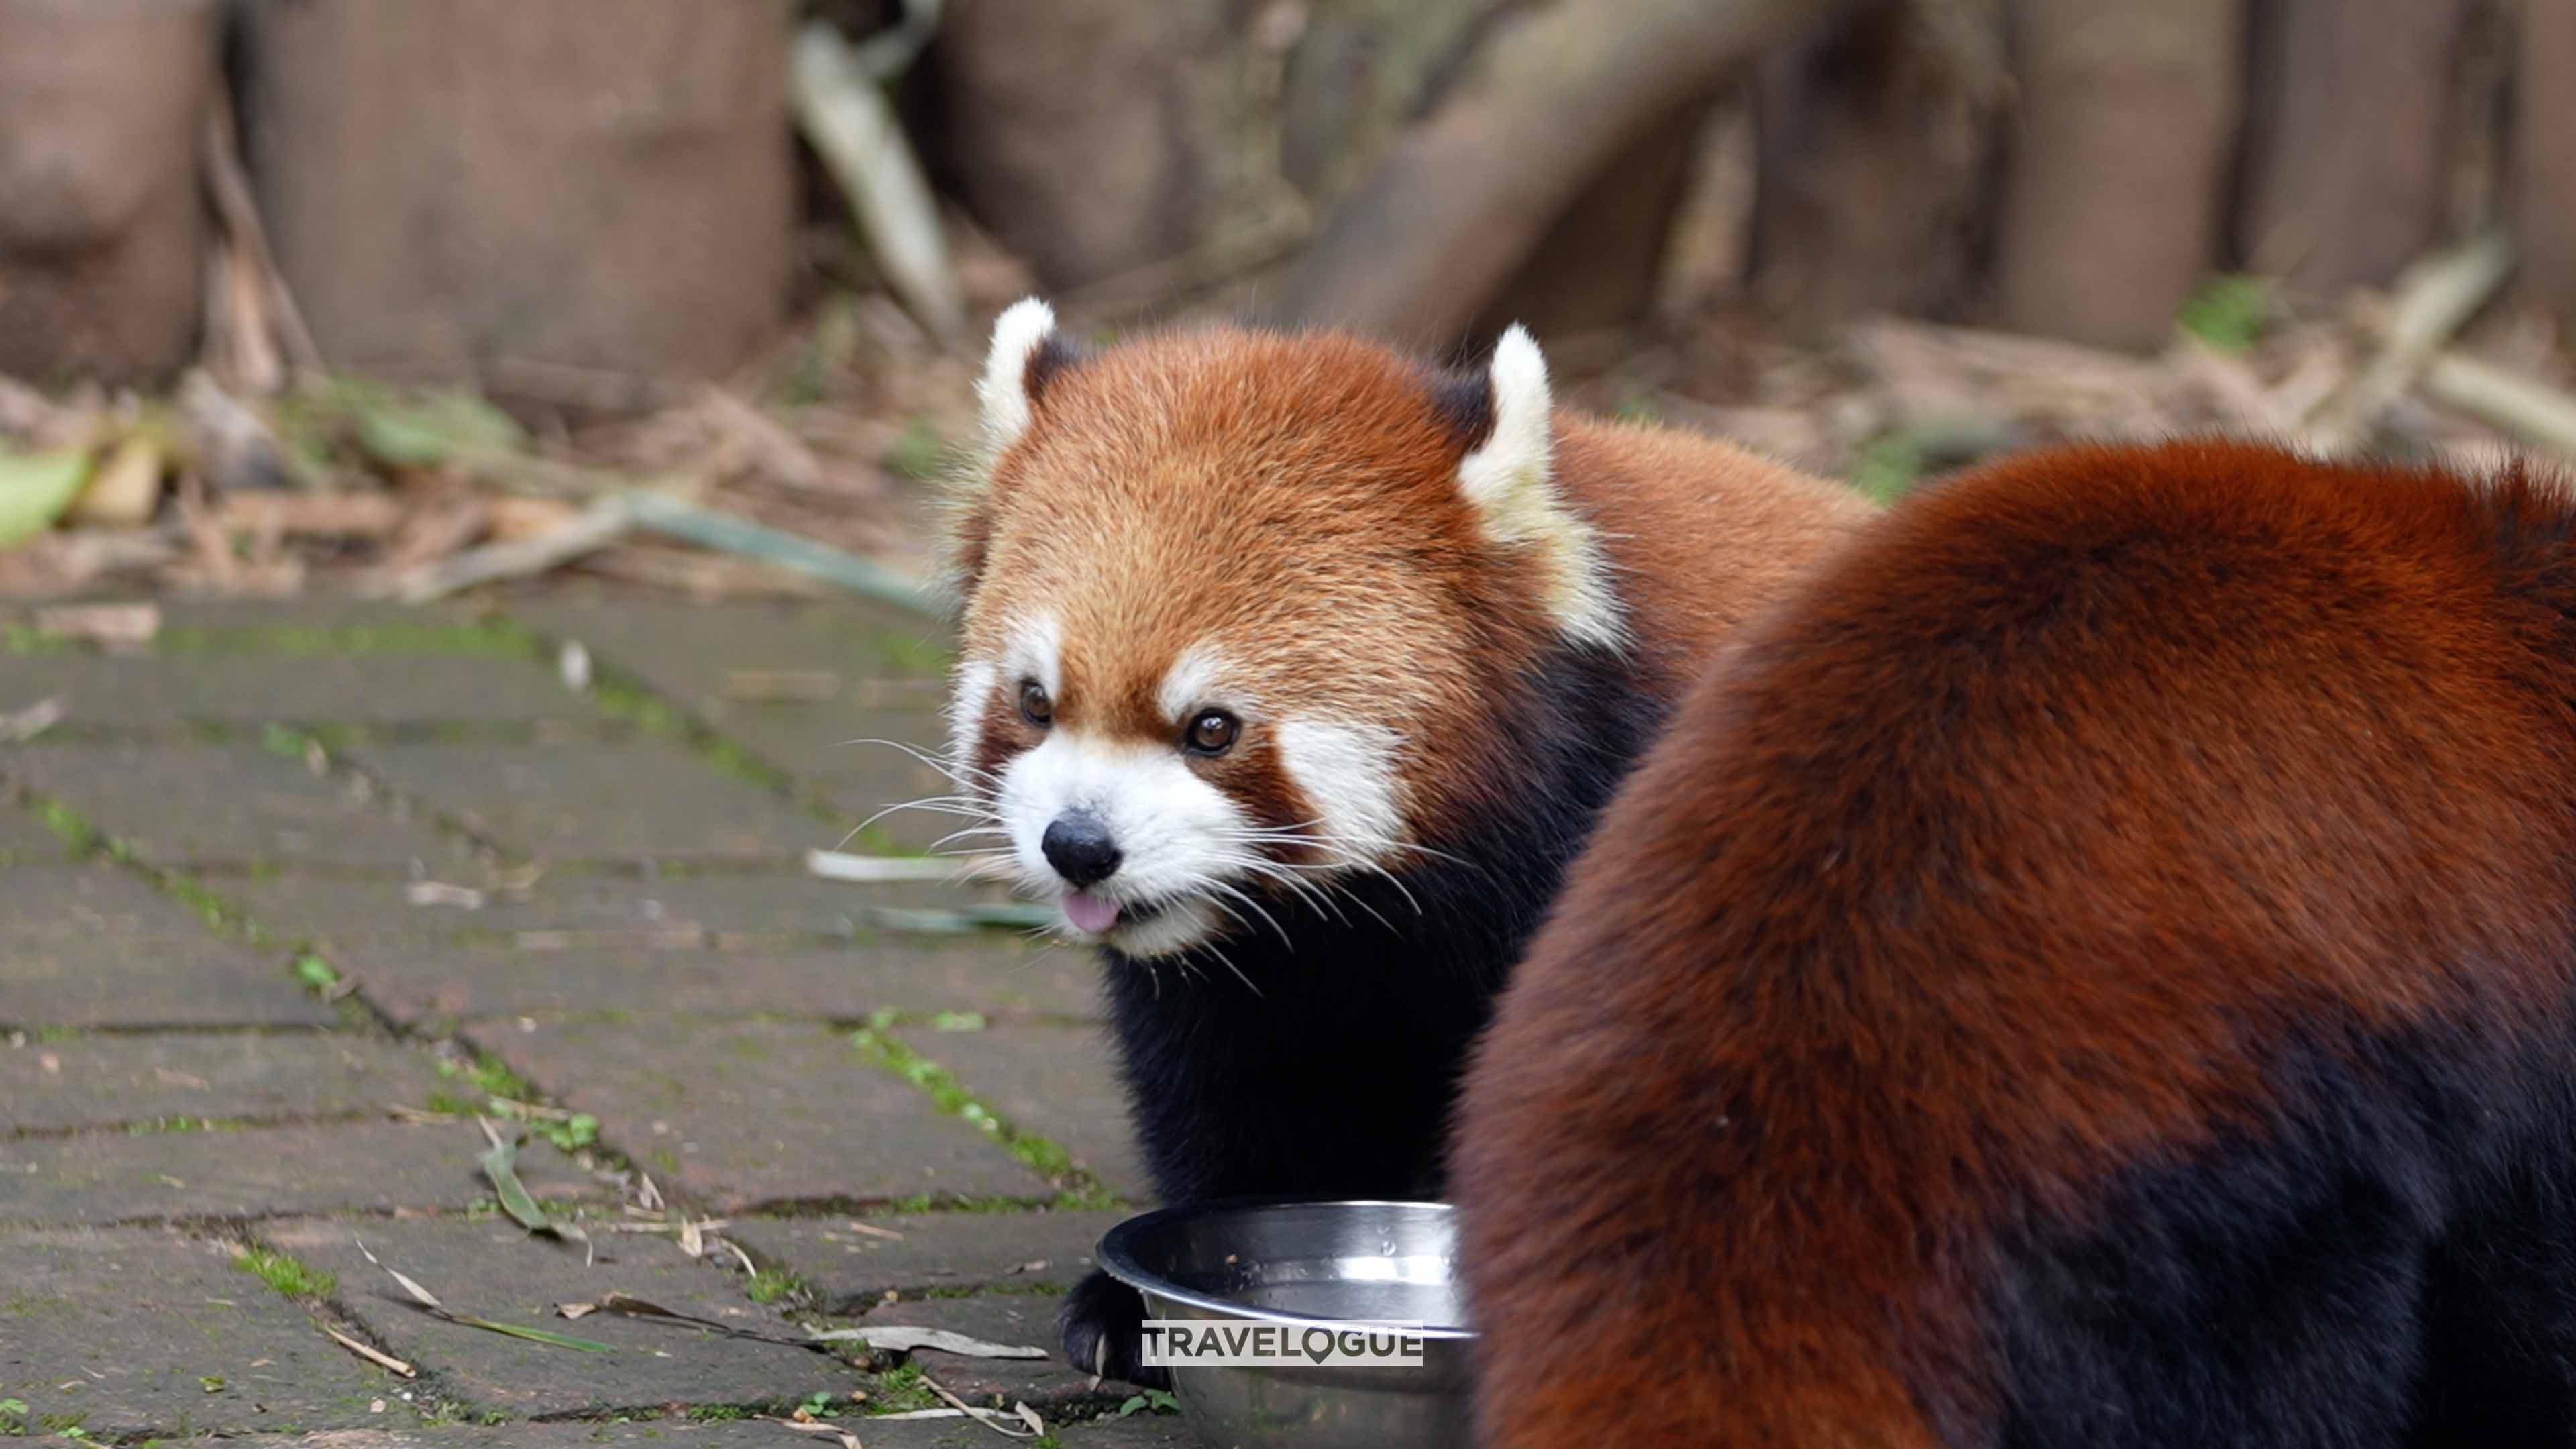 As well as the giant pandas, red pandas also live in the Chengdu Panda Base. /CGTN